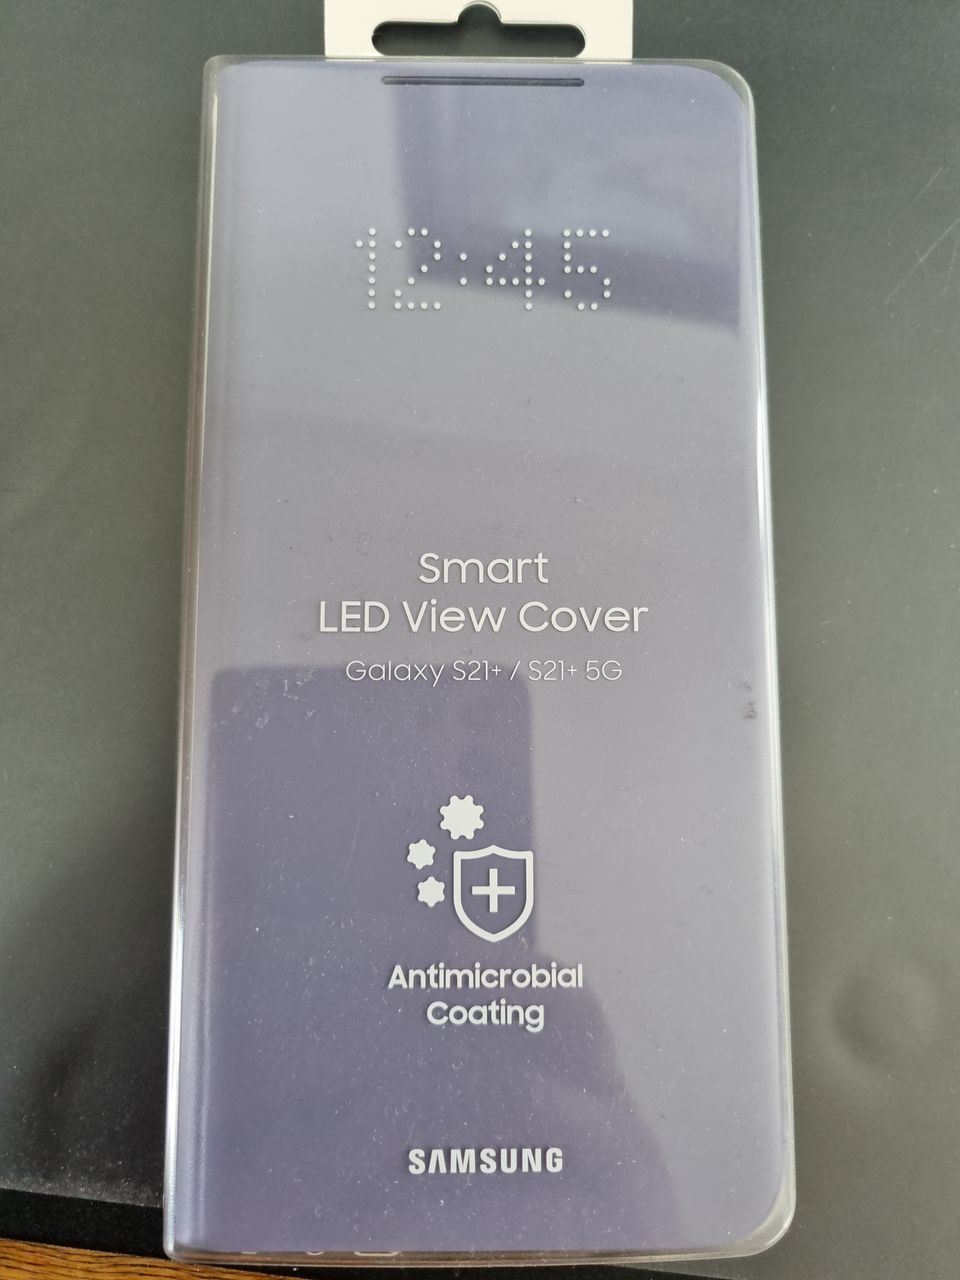 Smart led view cover galaxy S21+